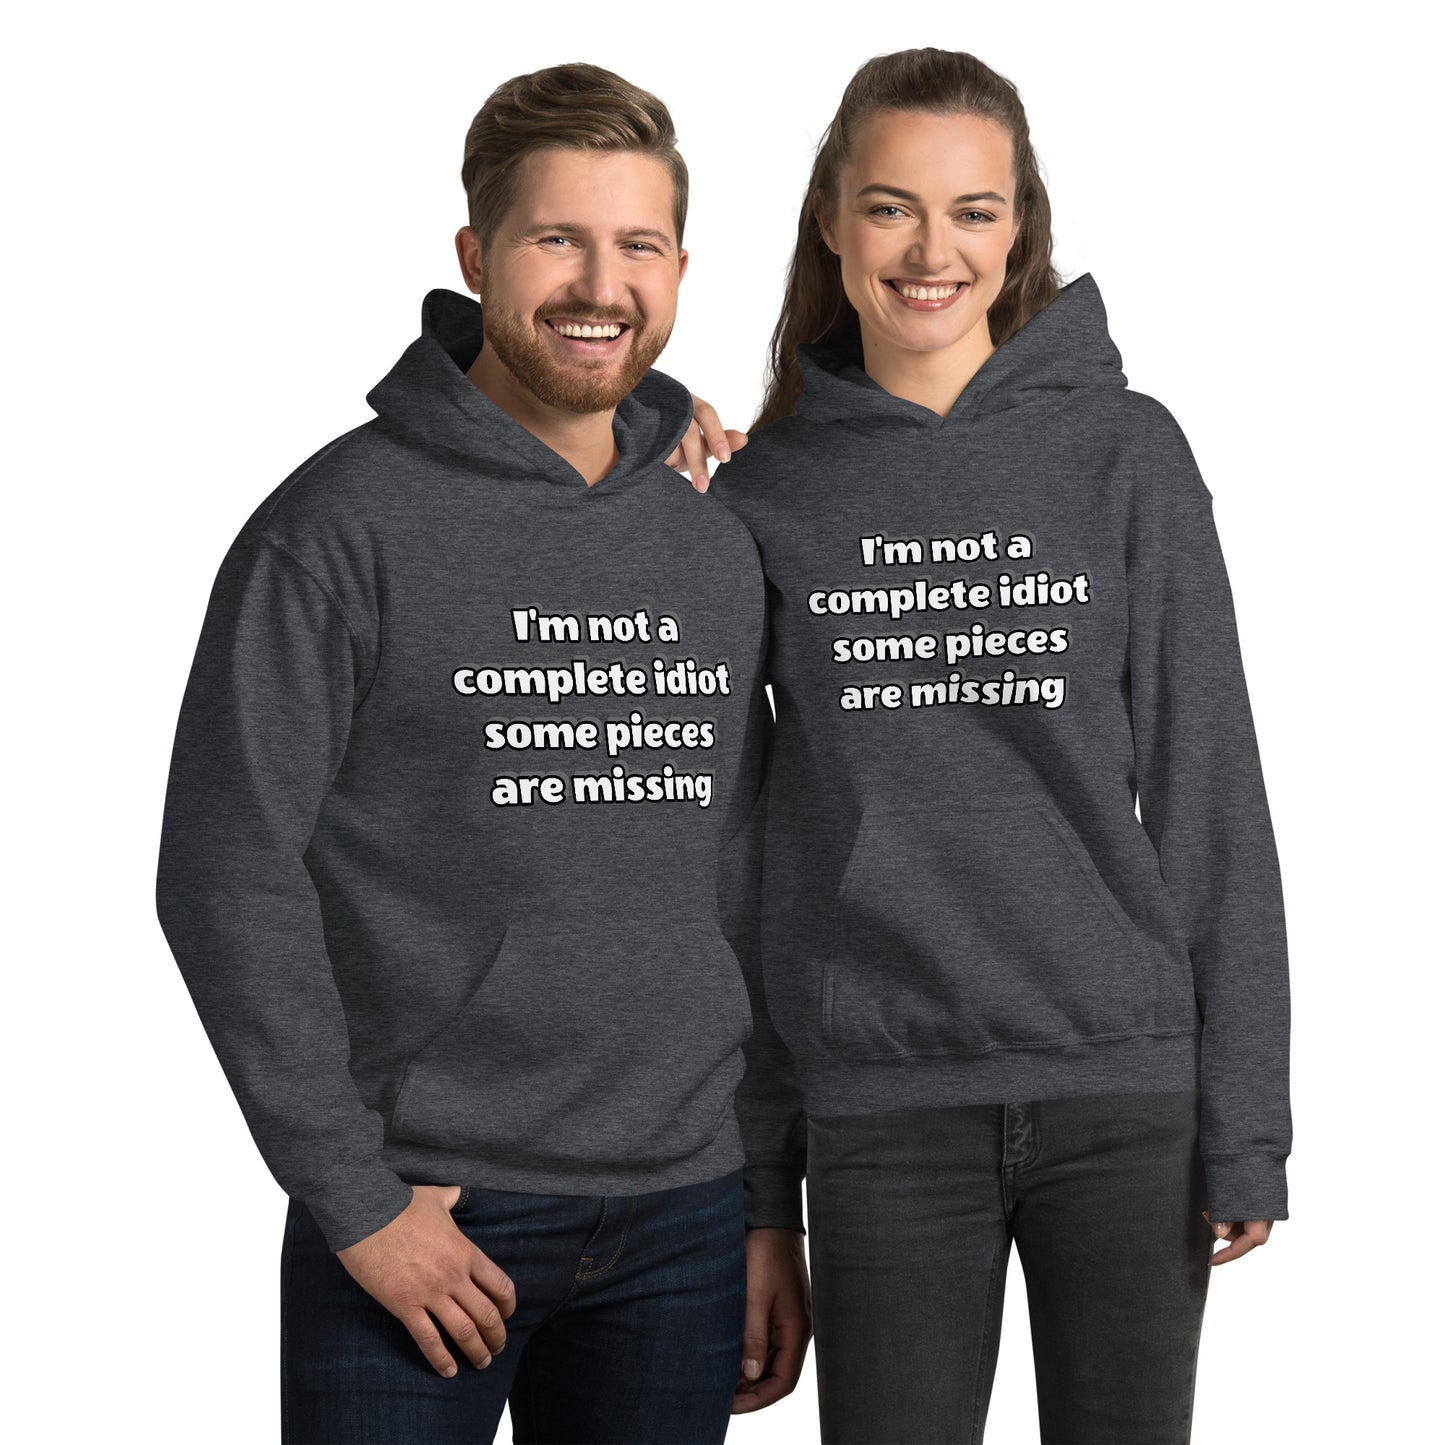 Men and women with dark gray hoodie with text “I’m not a complete idiot, some pieces are missing”